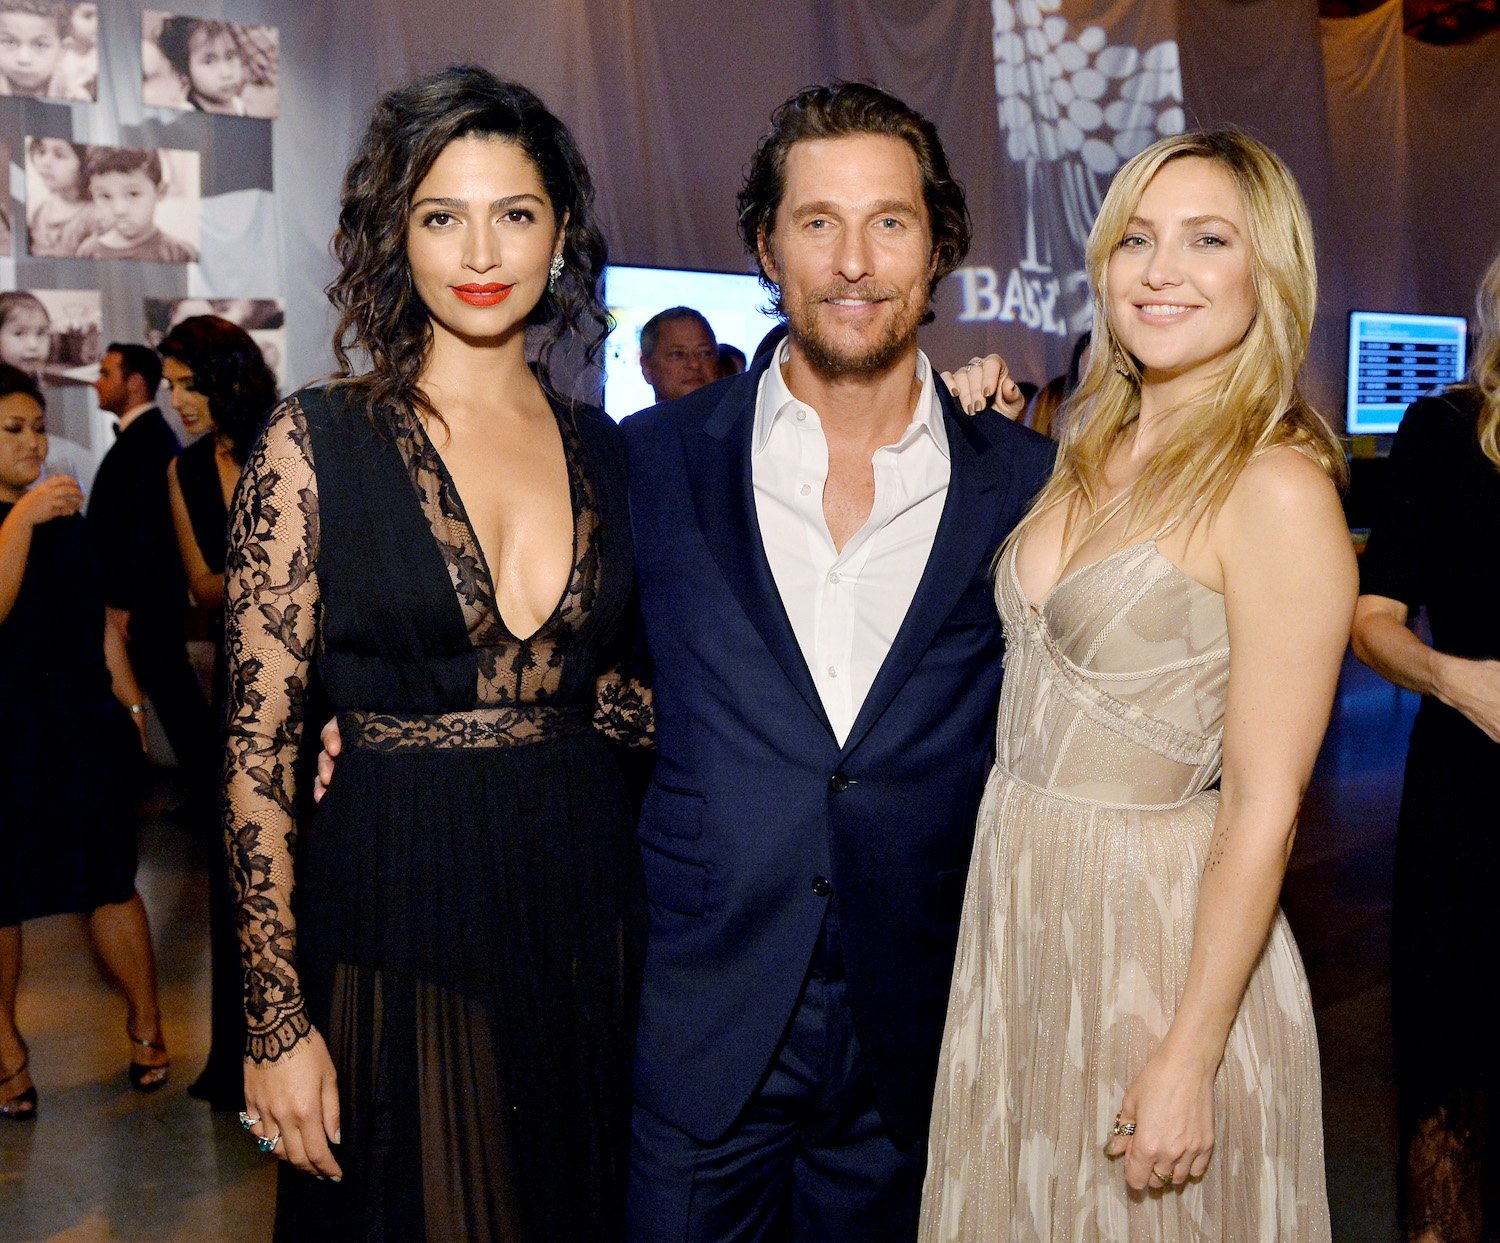 Camila Alves, Matthew McConaughey, and Kate Hudson attend the Fifth Annual Baby2Baby Gala